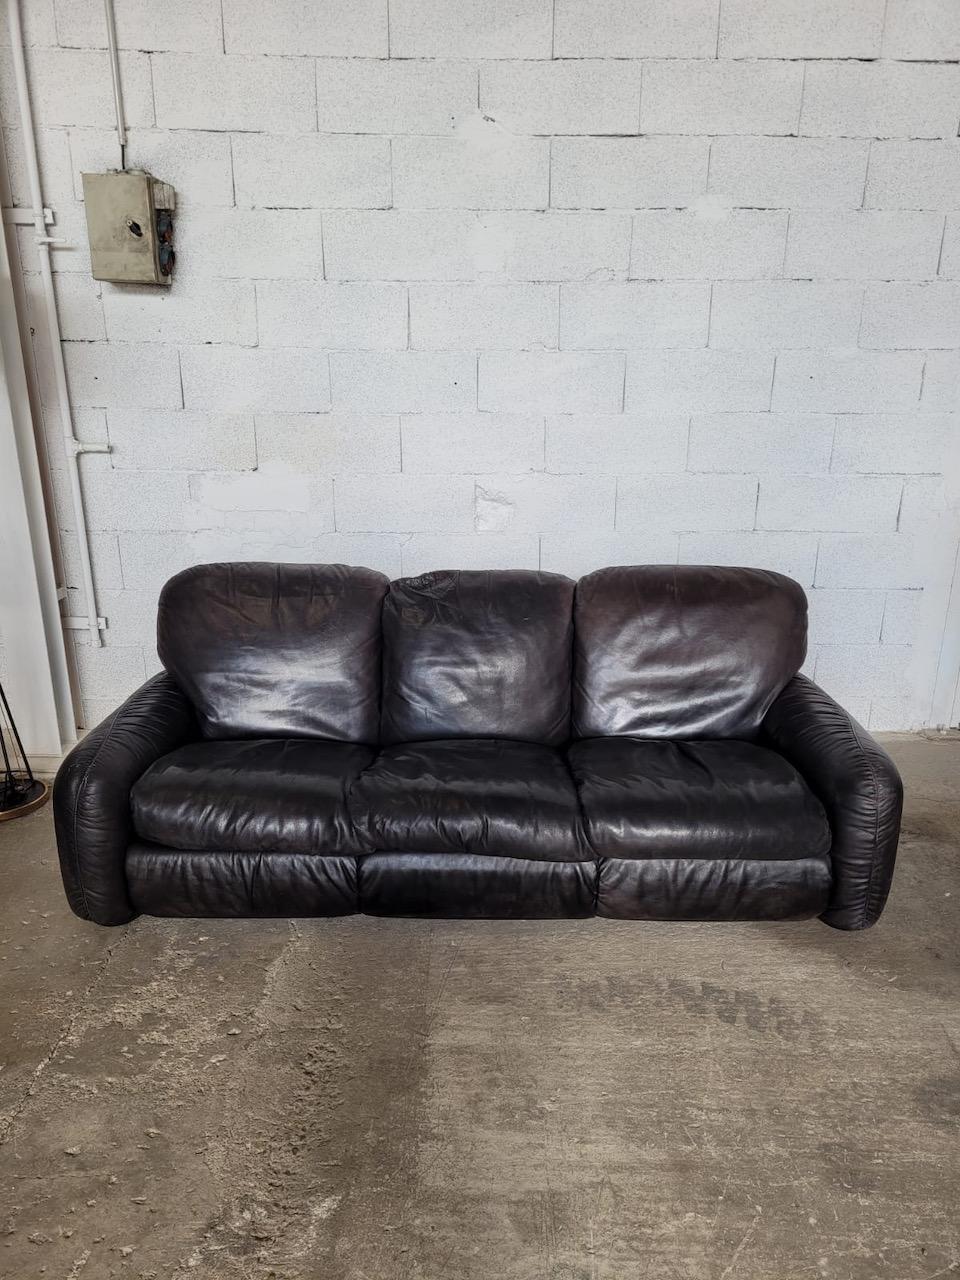 Arrigo Arigoni black leather sofa by busnelli model piumotto 1970. 
Goose down seat and backrest. Good condition, nice patina. 
Dimensions : Width: 200 cm. Height: 75 cm. Depth: 90 cm. Seat height: 45 cm.